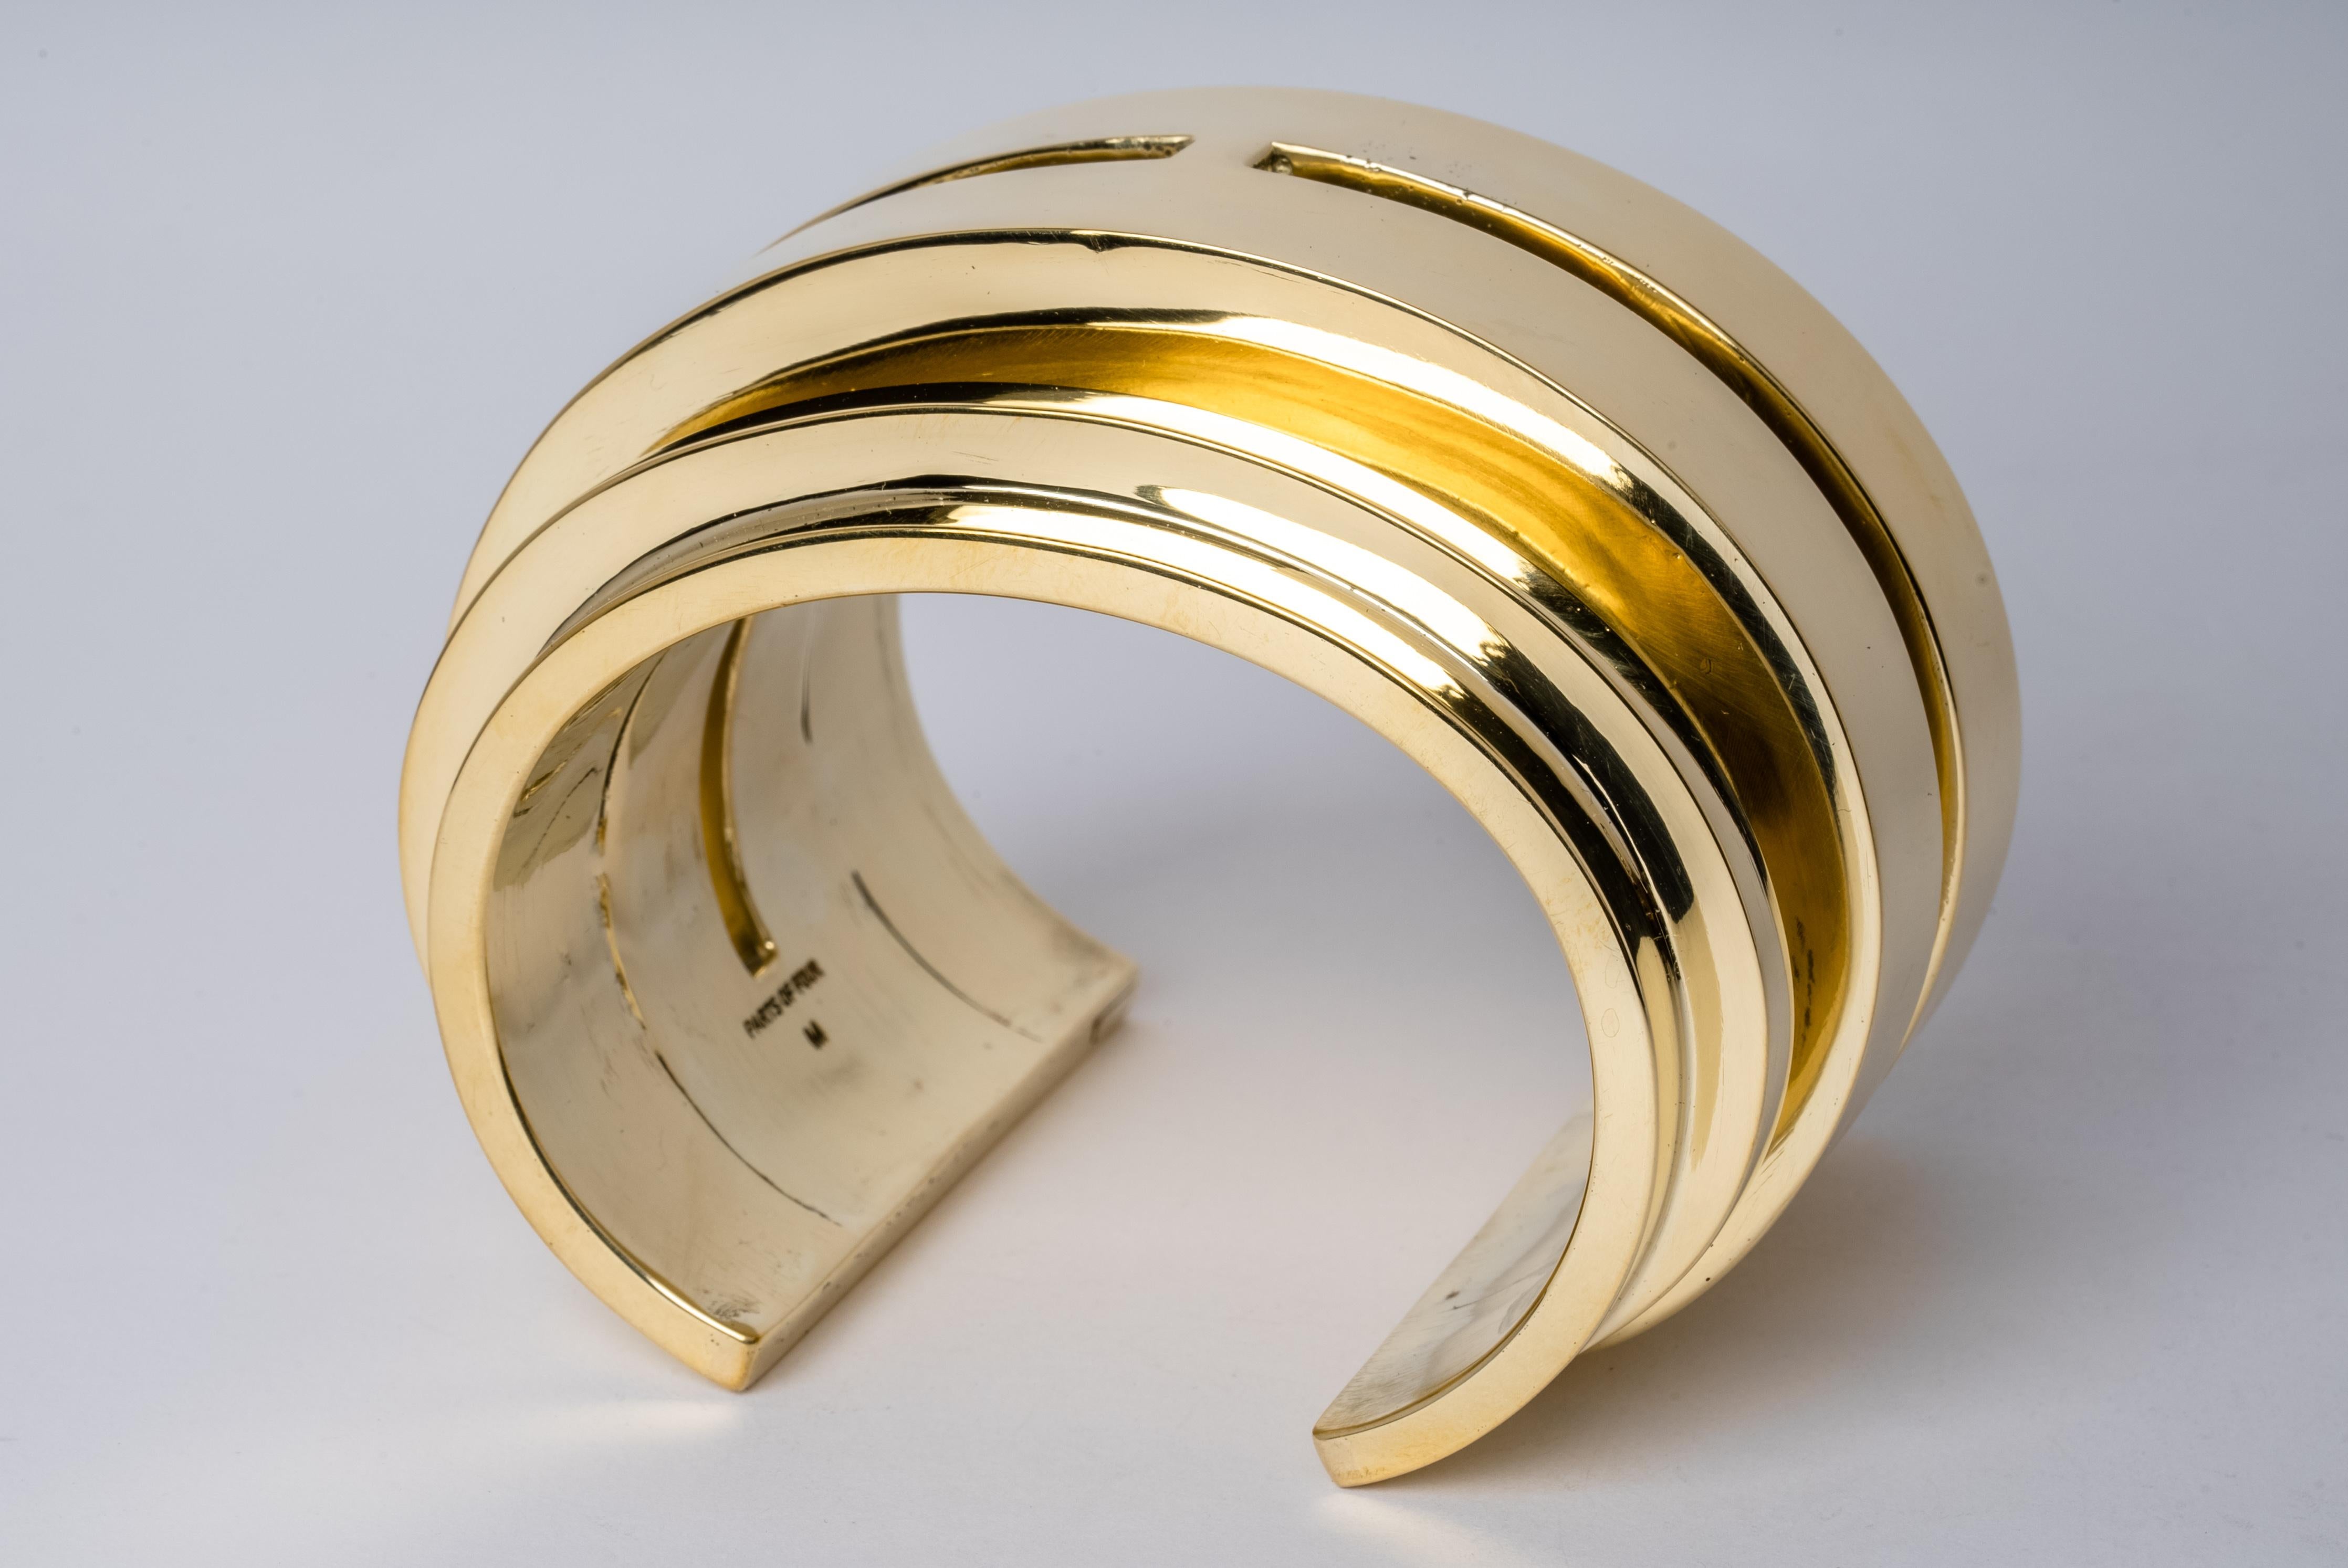 Bracelet in polished brass. This piece is 100% hand fabricated from metal plate; cut into sections and soldered together to make the hollow three dimensional form. This series seeks to reduce combinations of forms to their primary silhouettes.